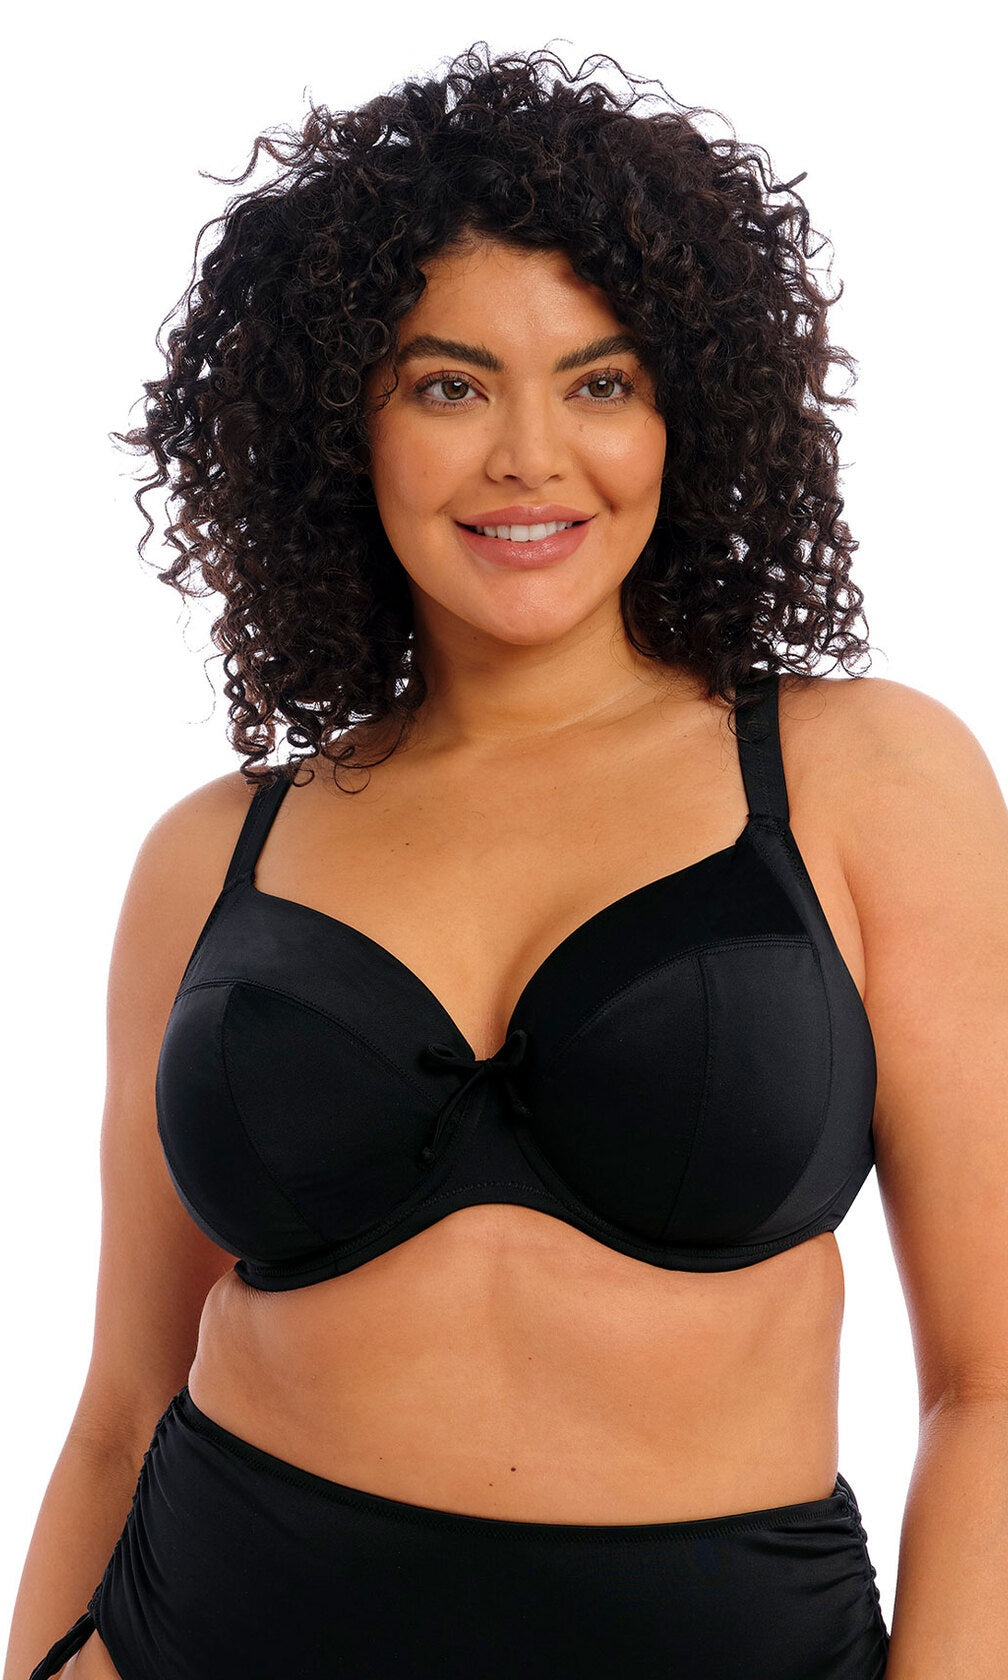 Plain Sailing Black UW Plunge Bikini Top, Special Order E Cup to JJ Cup